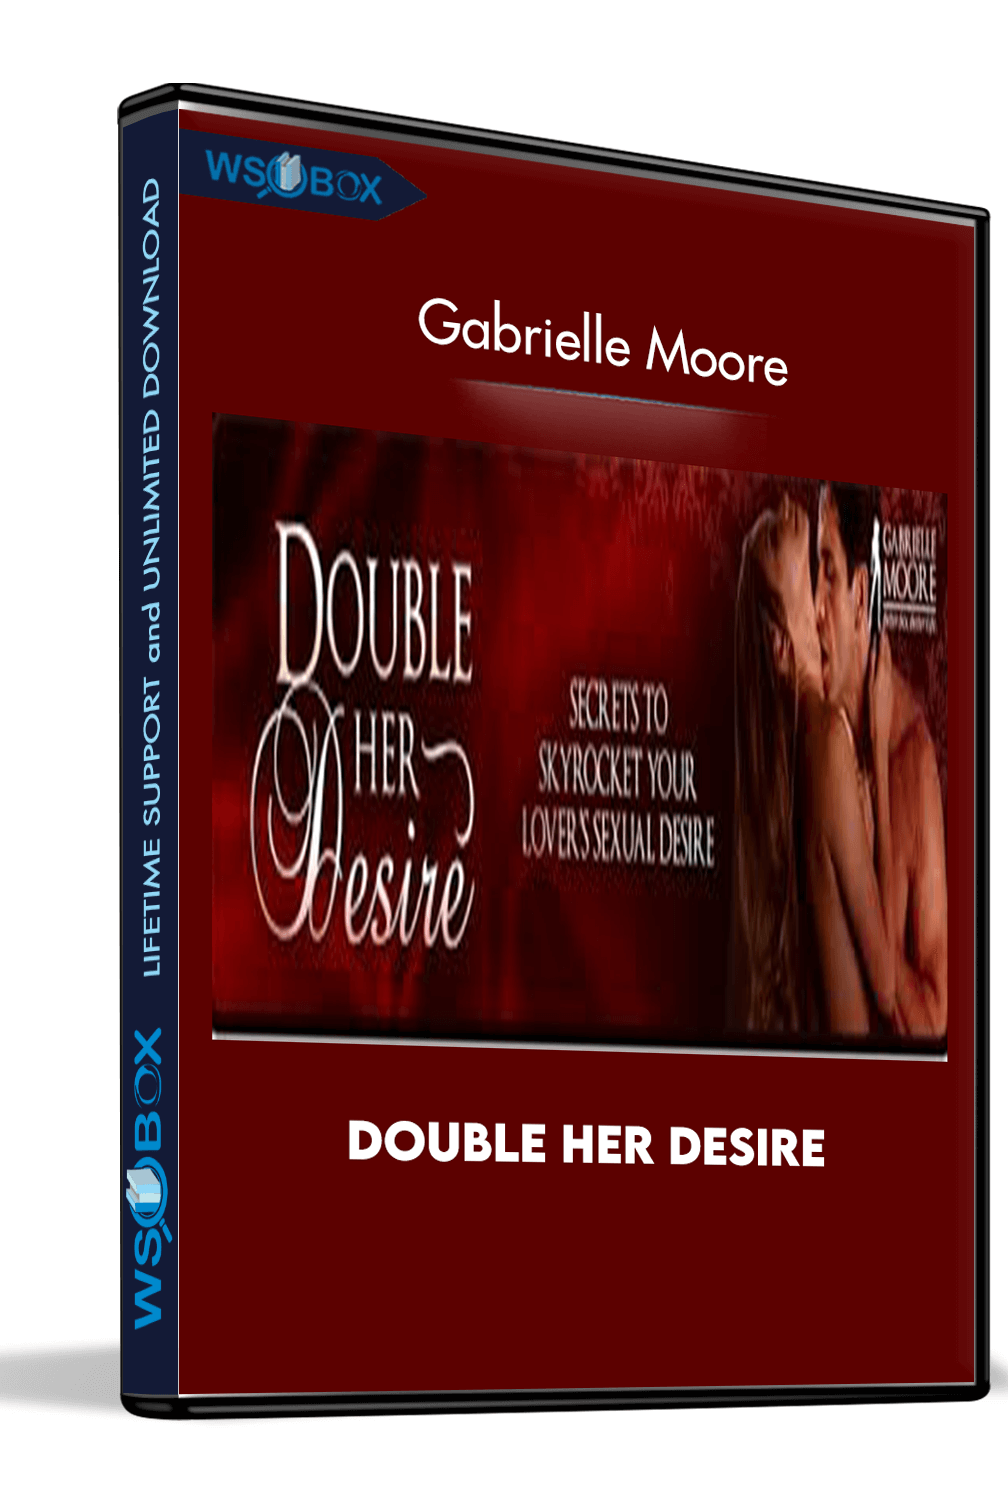 double-her-desire-gabrielle-moore